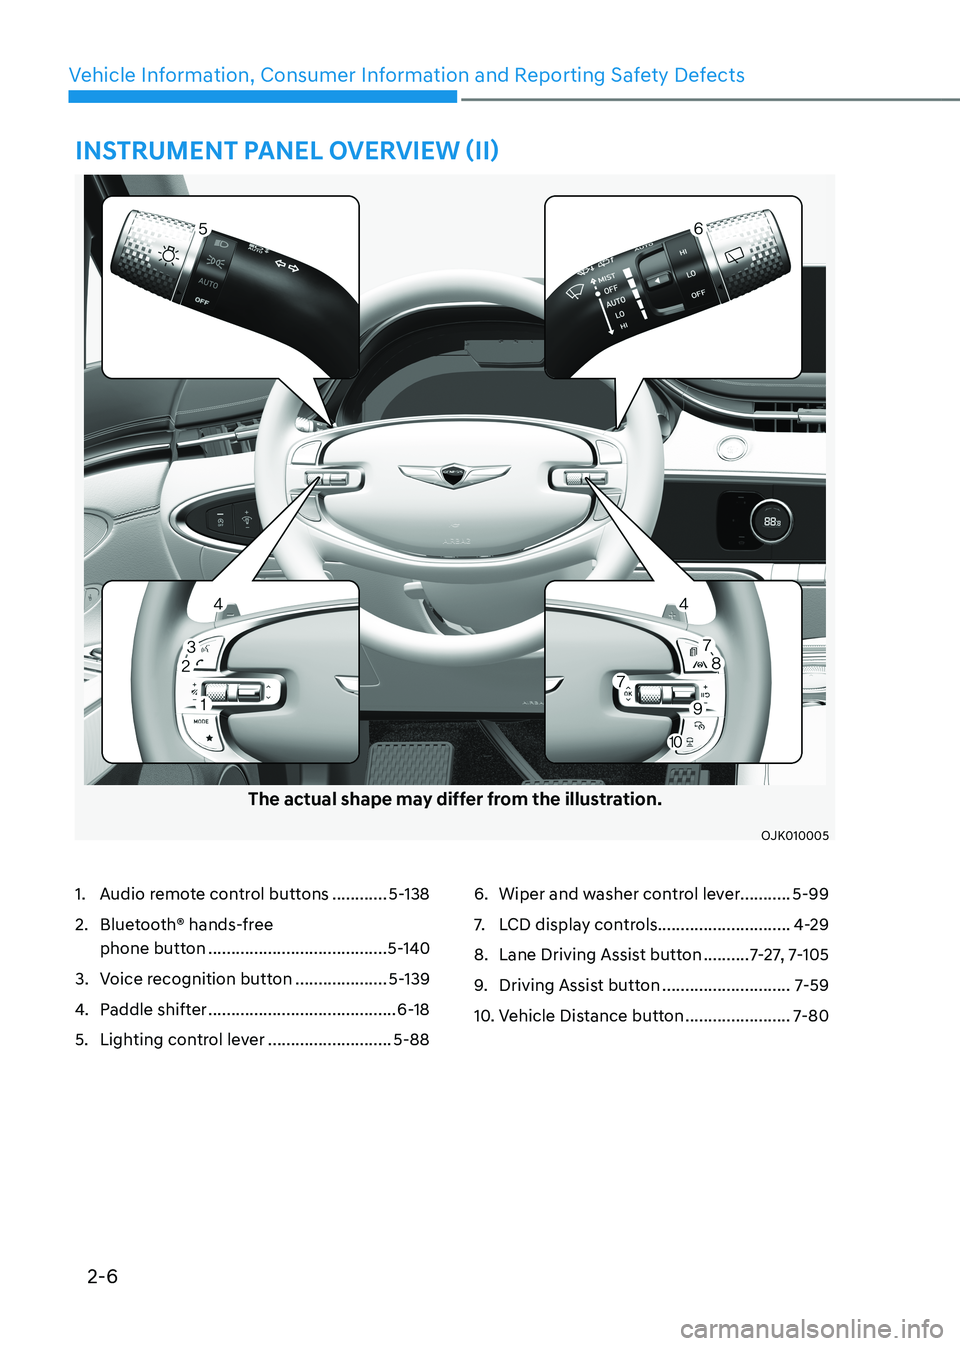 HYUNDAI GENESIS GV70 2022  Owners Manual 2-6
Vehicle Information, Consumer Information and Reporting Safety Defects
INSTRUMENT PANEL OVERVIEW (II)
The actual shape may differ from the illustration.
OJK010005OJK010005
1. Audio remote control 